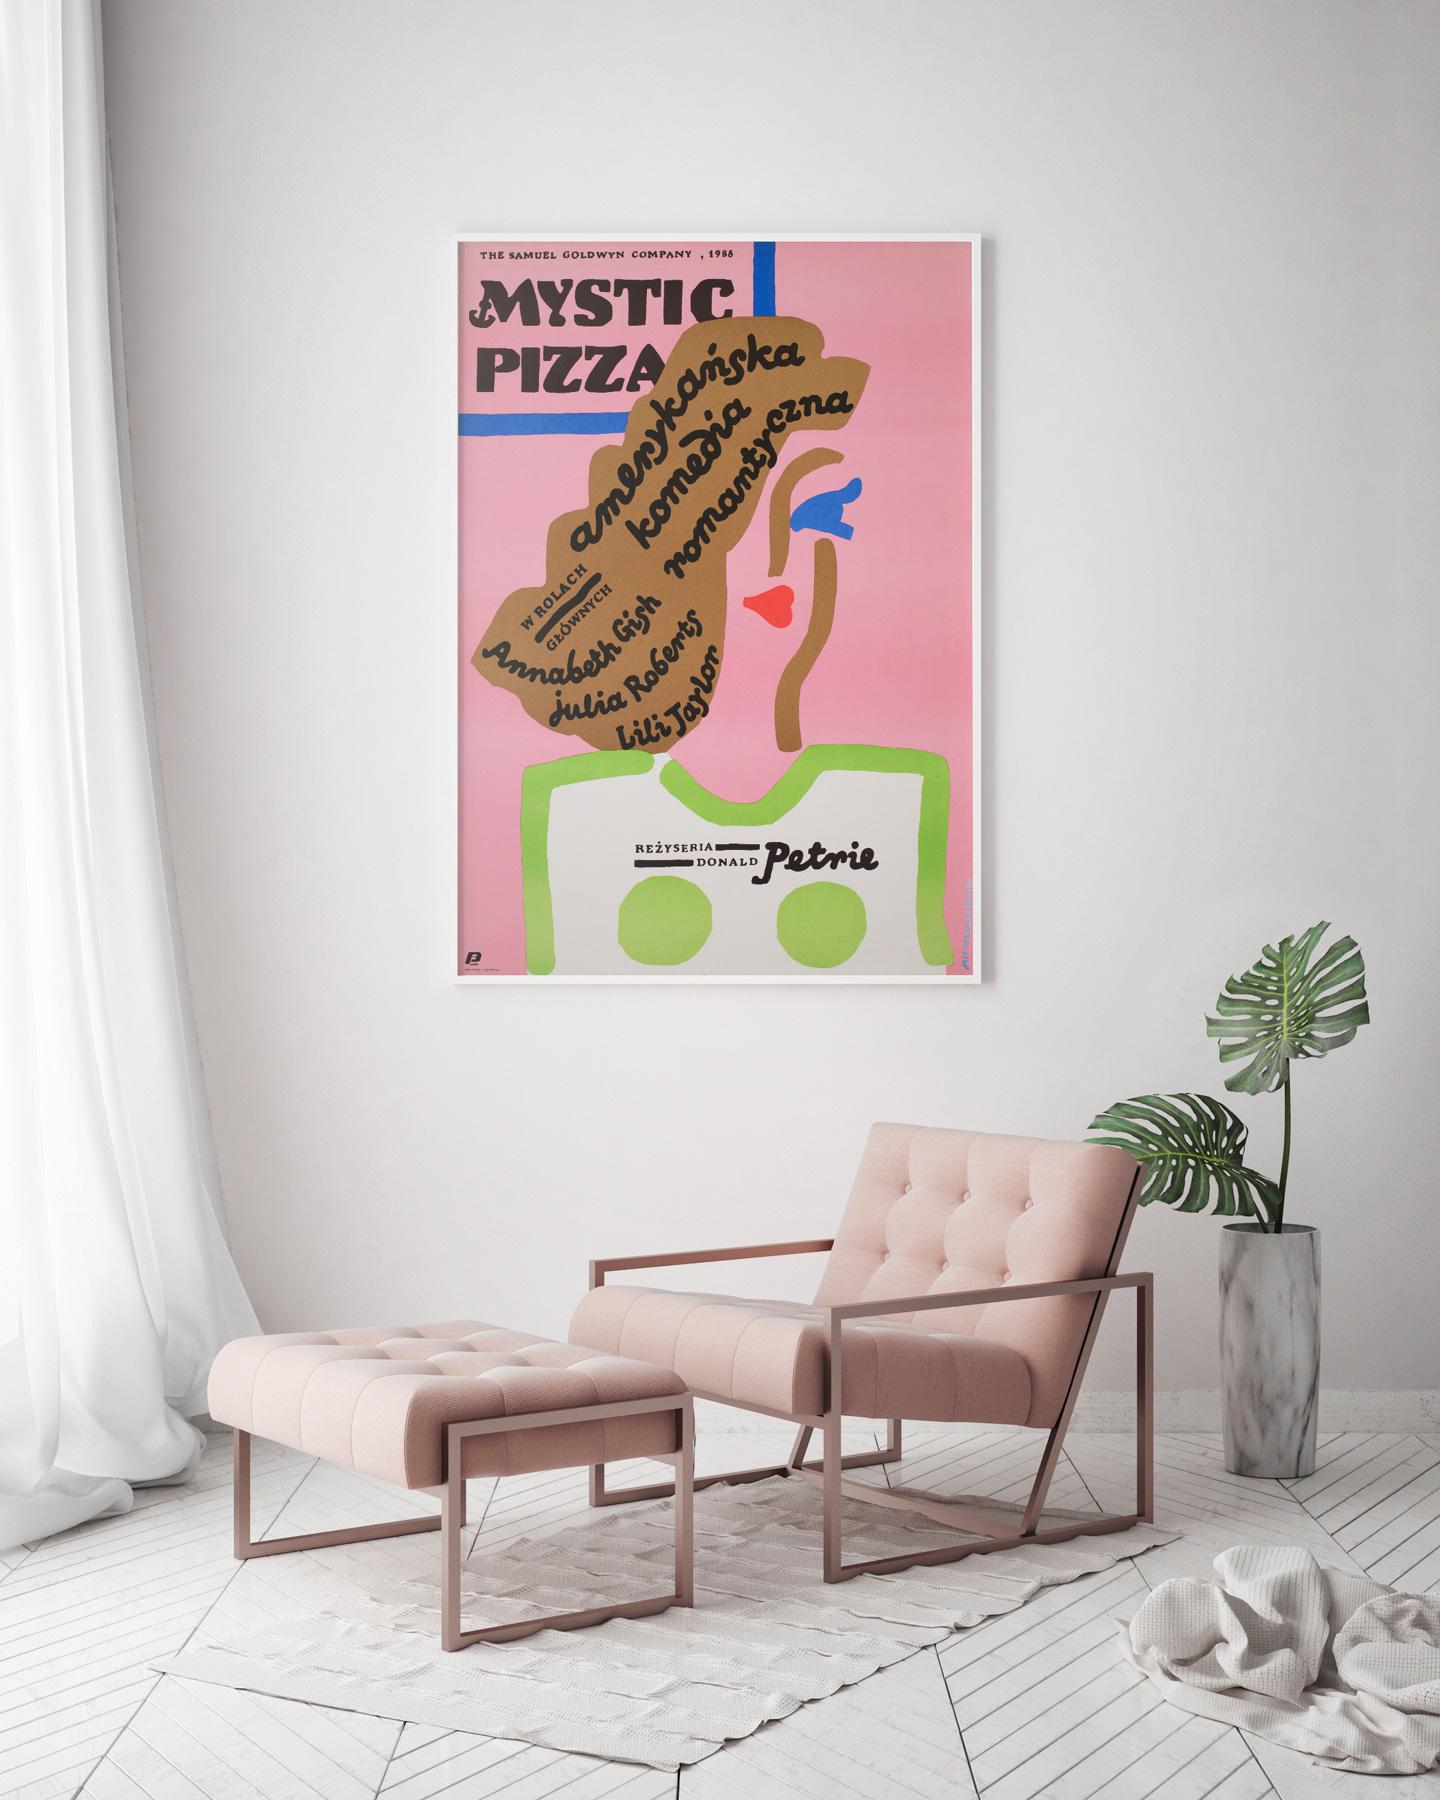 Three teenage girls come of age while working at a pizza parlor in the Connecticut town of Mystic. Great bold artwork by Jan Mlodozeniec features on the Polish film poster for romantic comedy-drama Mystic Pizza directed by Donald Petrie and starring